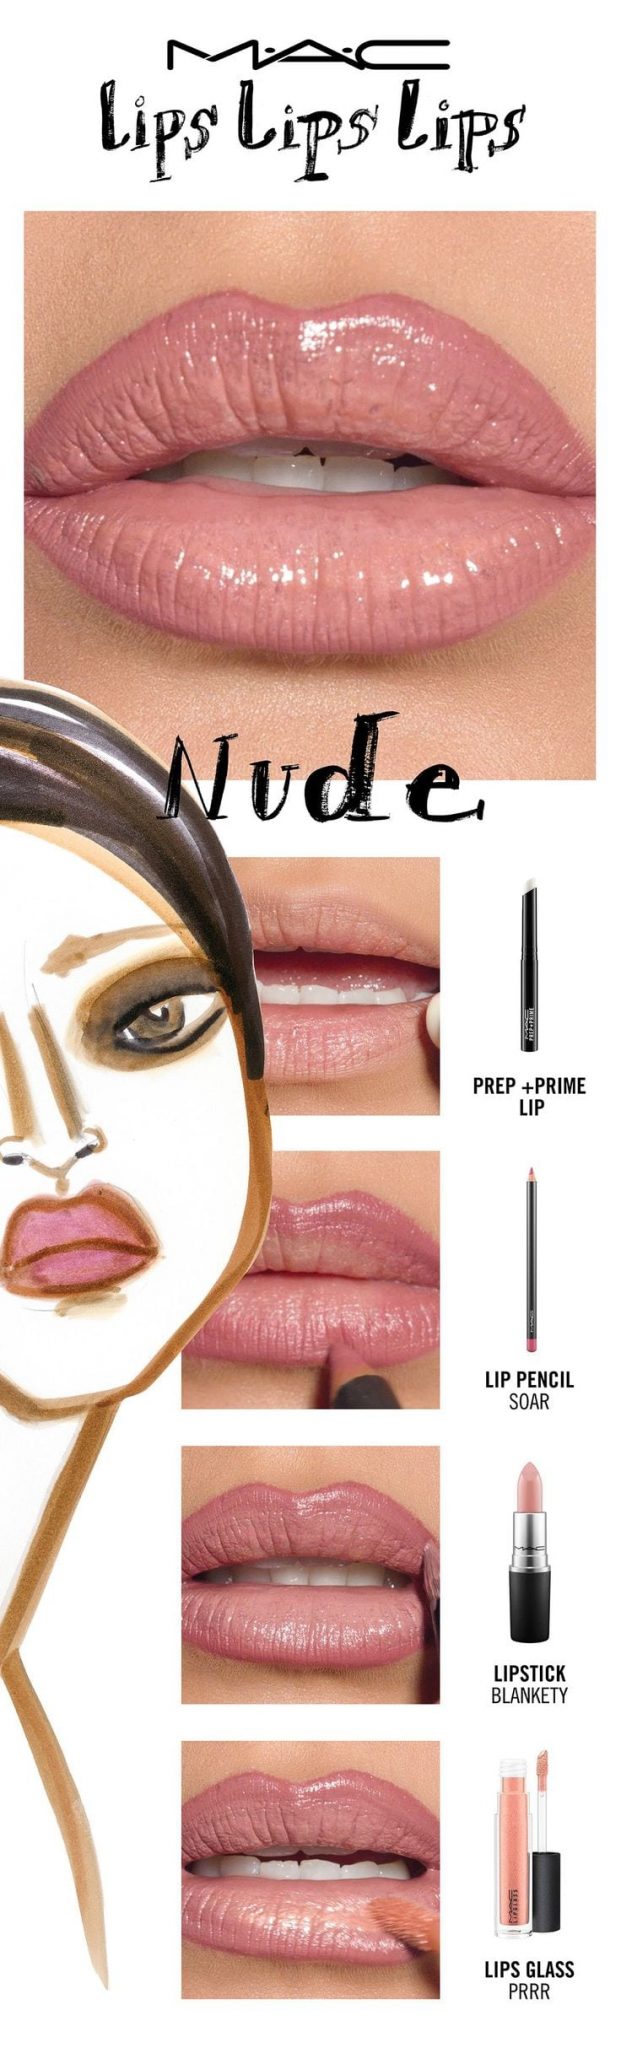 [ad_1]

Go in the buff with the perfectly overdrawn look of The Instagram Nude! We’ve got nude lip ideas for every skin tone. Try a lip trend, then make it your own! Your choice. Your creation. Your trend.  Created by…